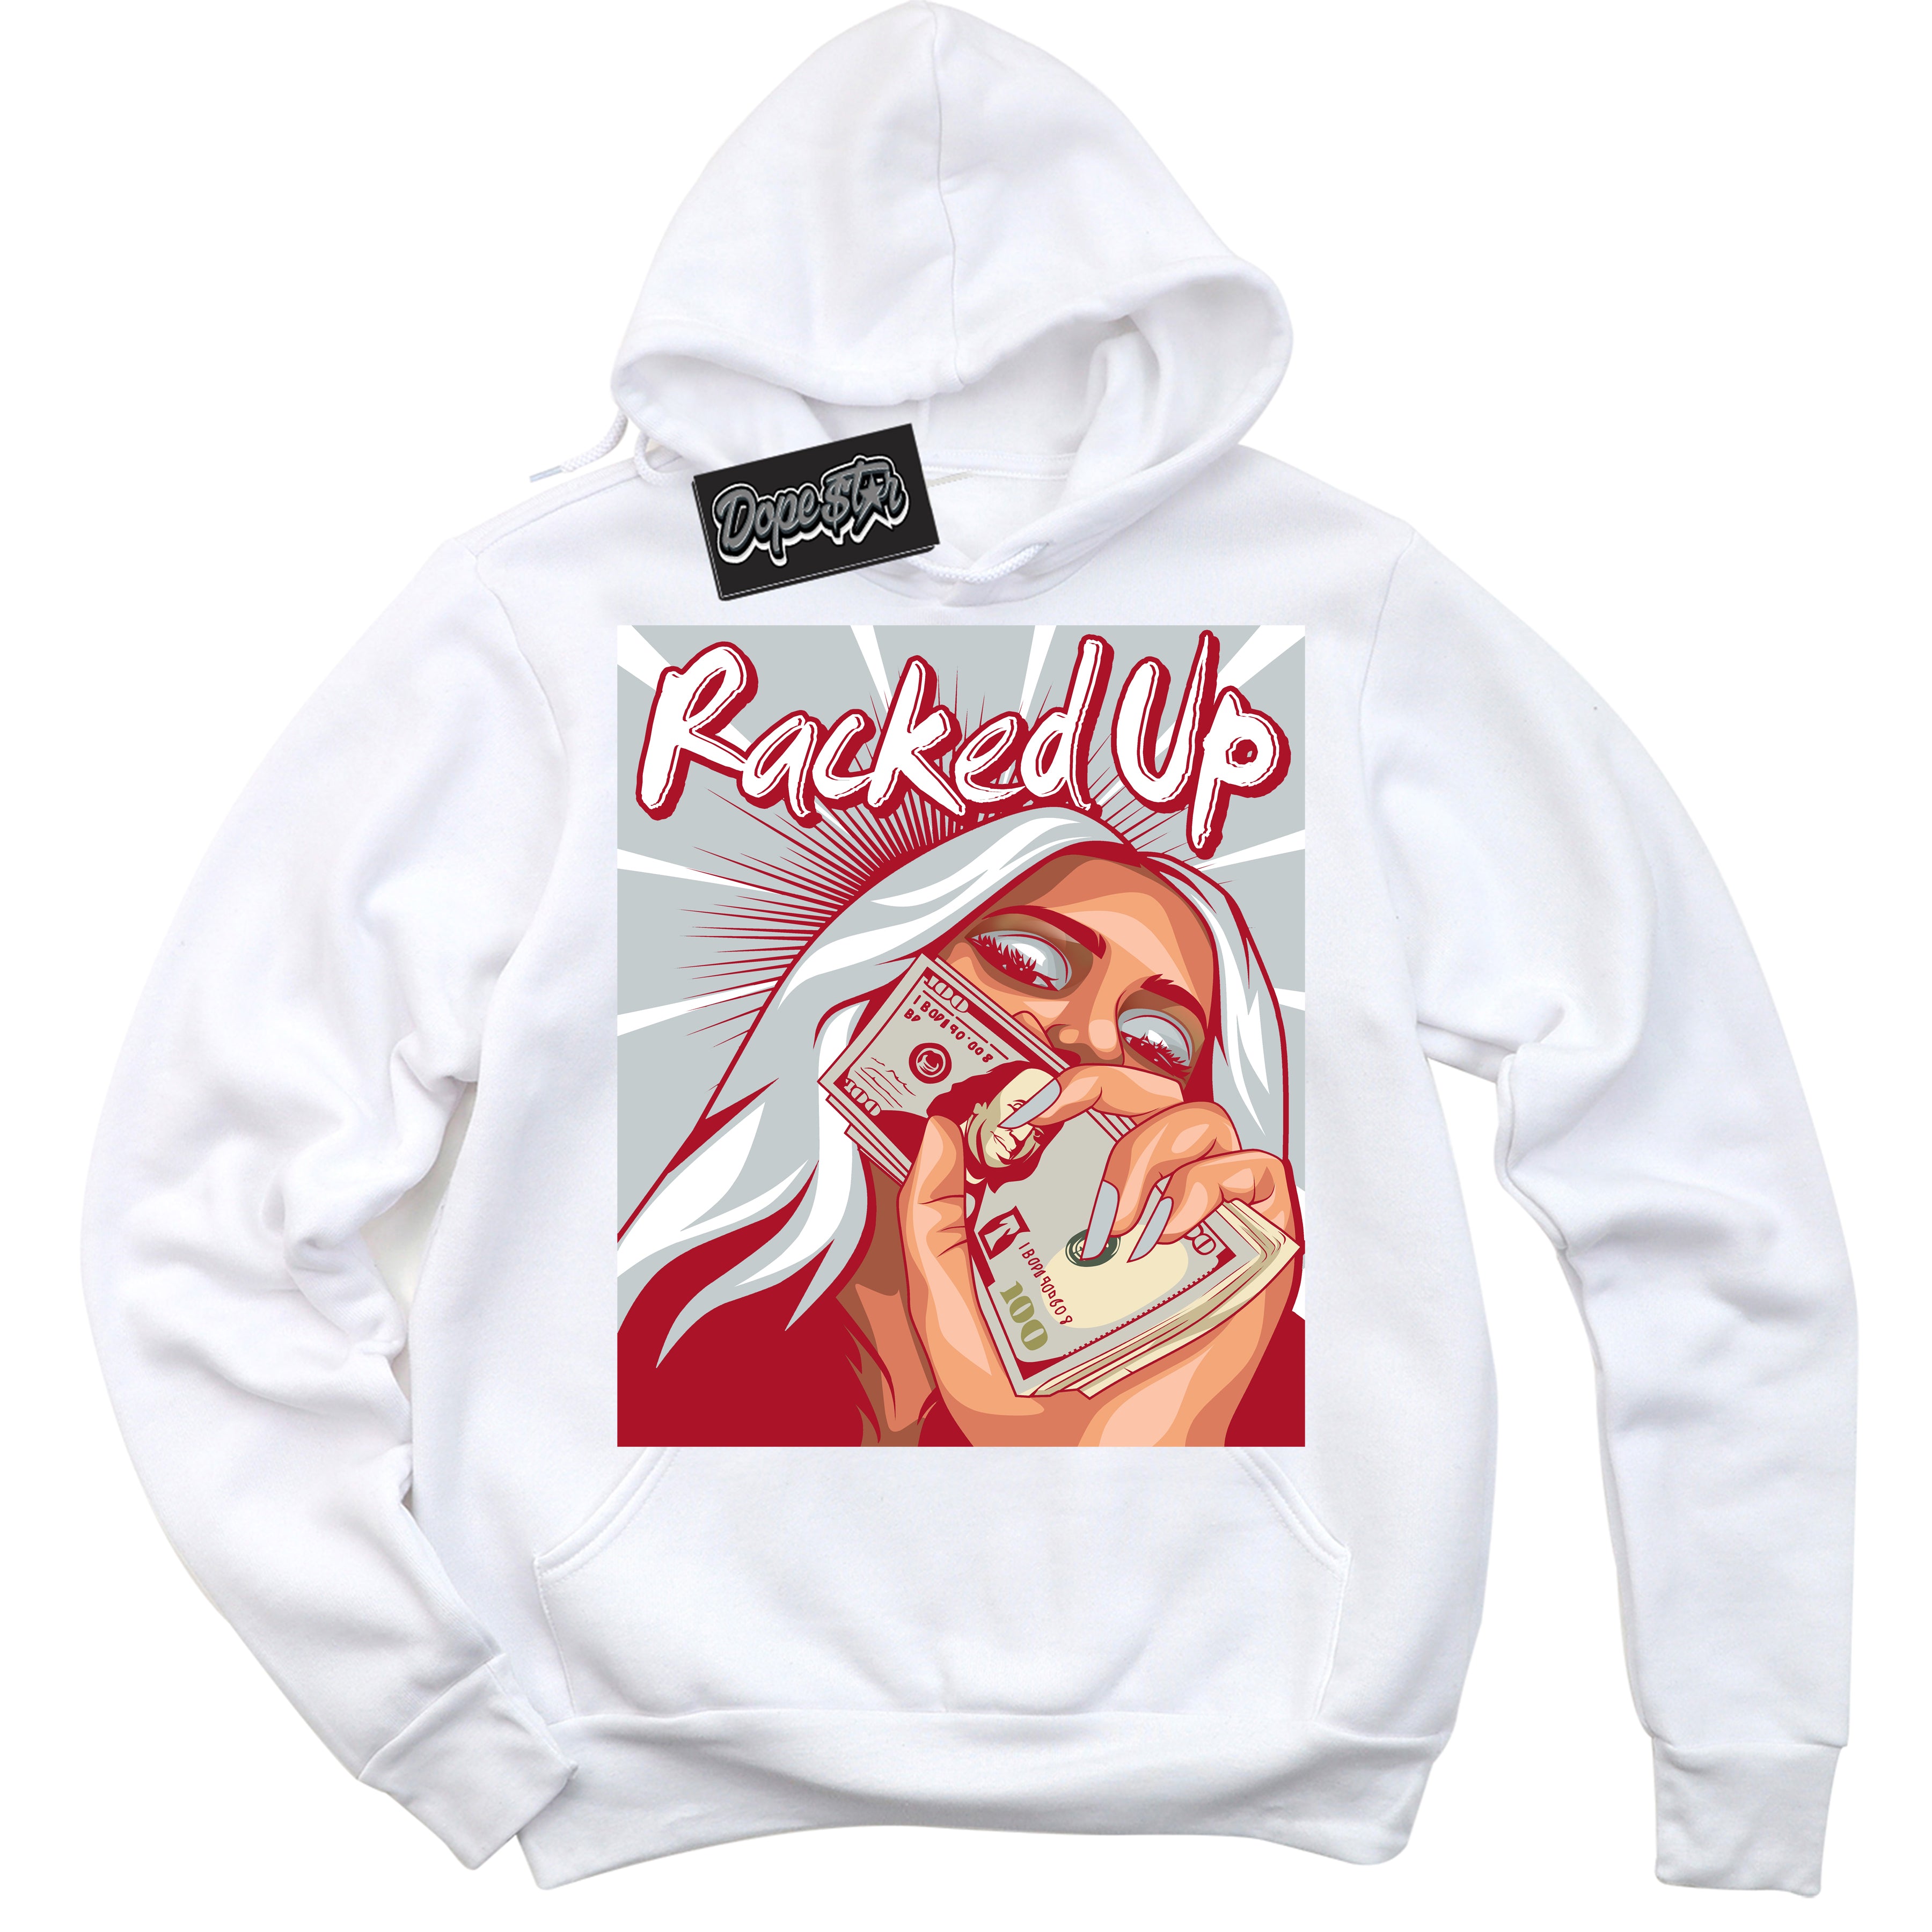 Cool White Hoodie with “ Racked Up ”  design that Perfectly Matches  Reverse Ultraman Sneakers.